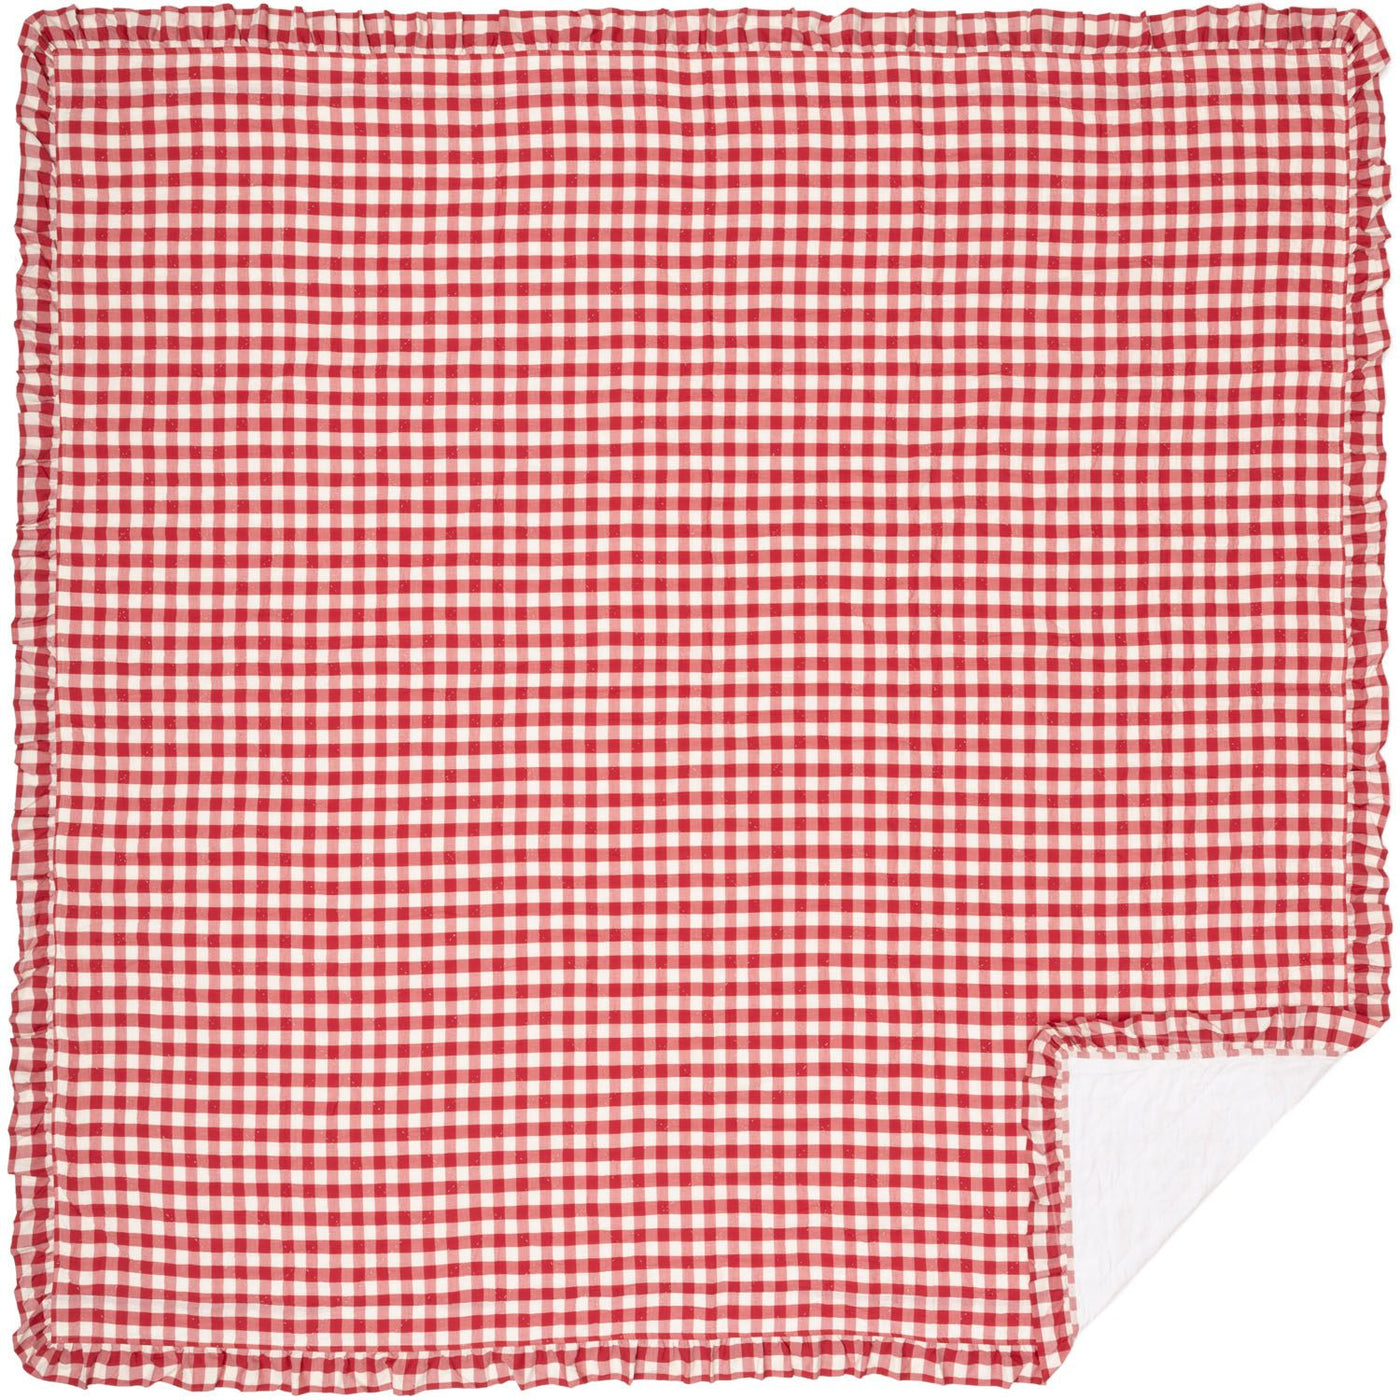 Kuna Queen Ruffled Quilt - Red/White